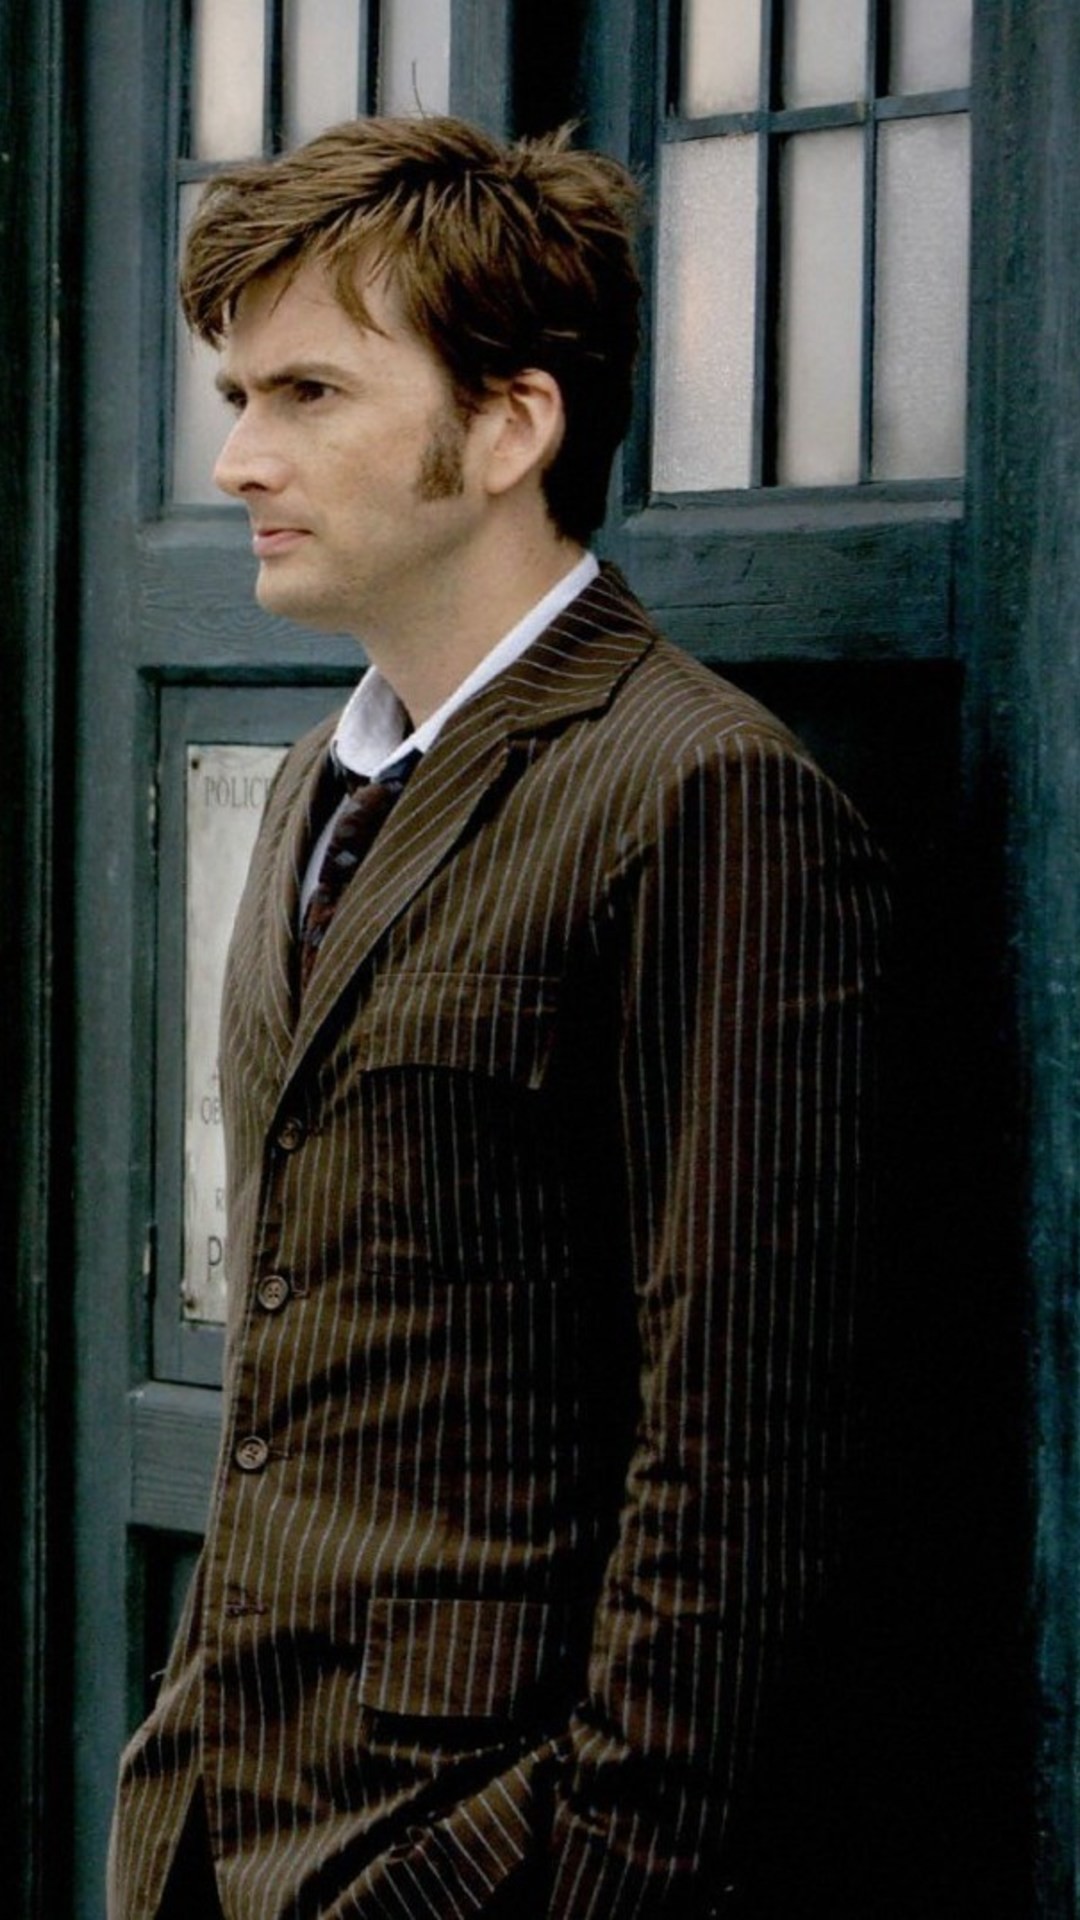 David tennant in doctor who wallpaper